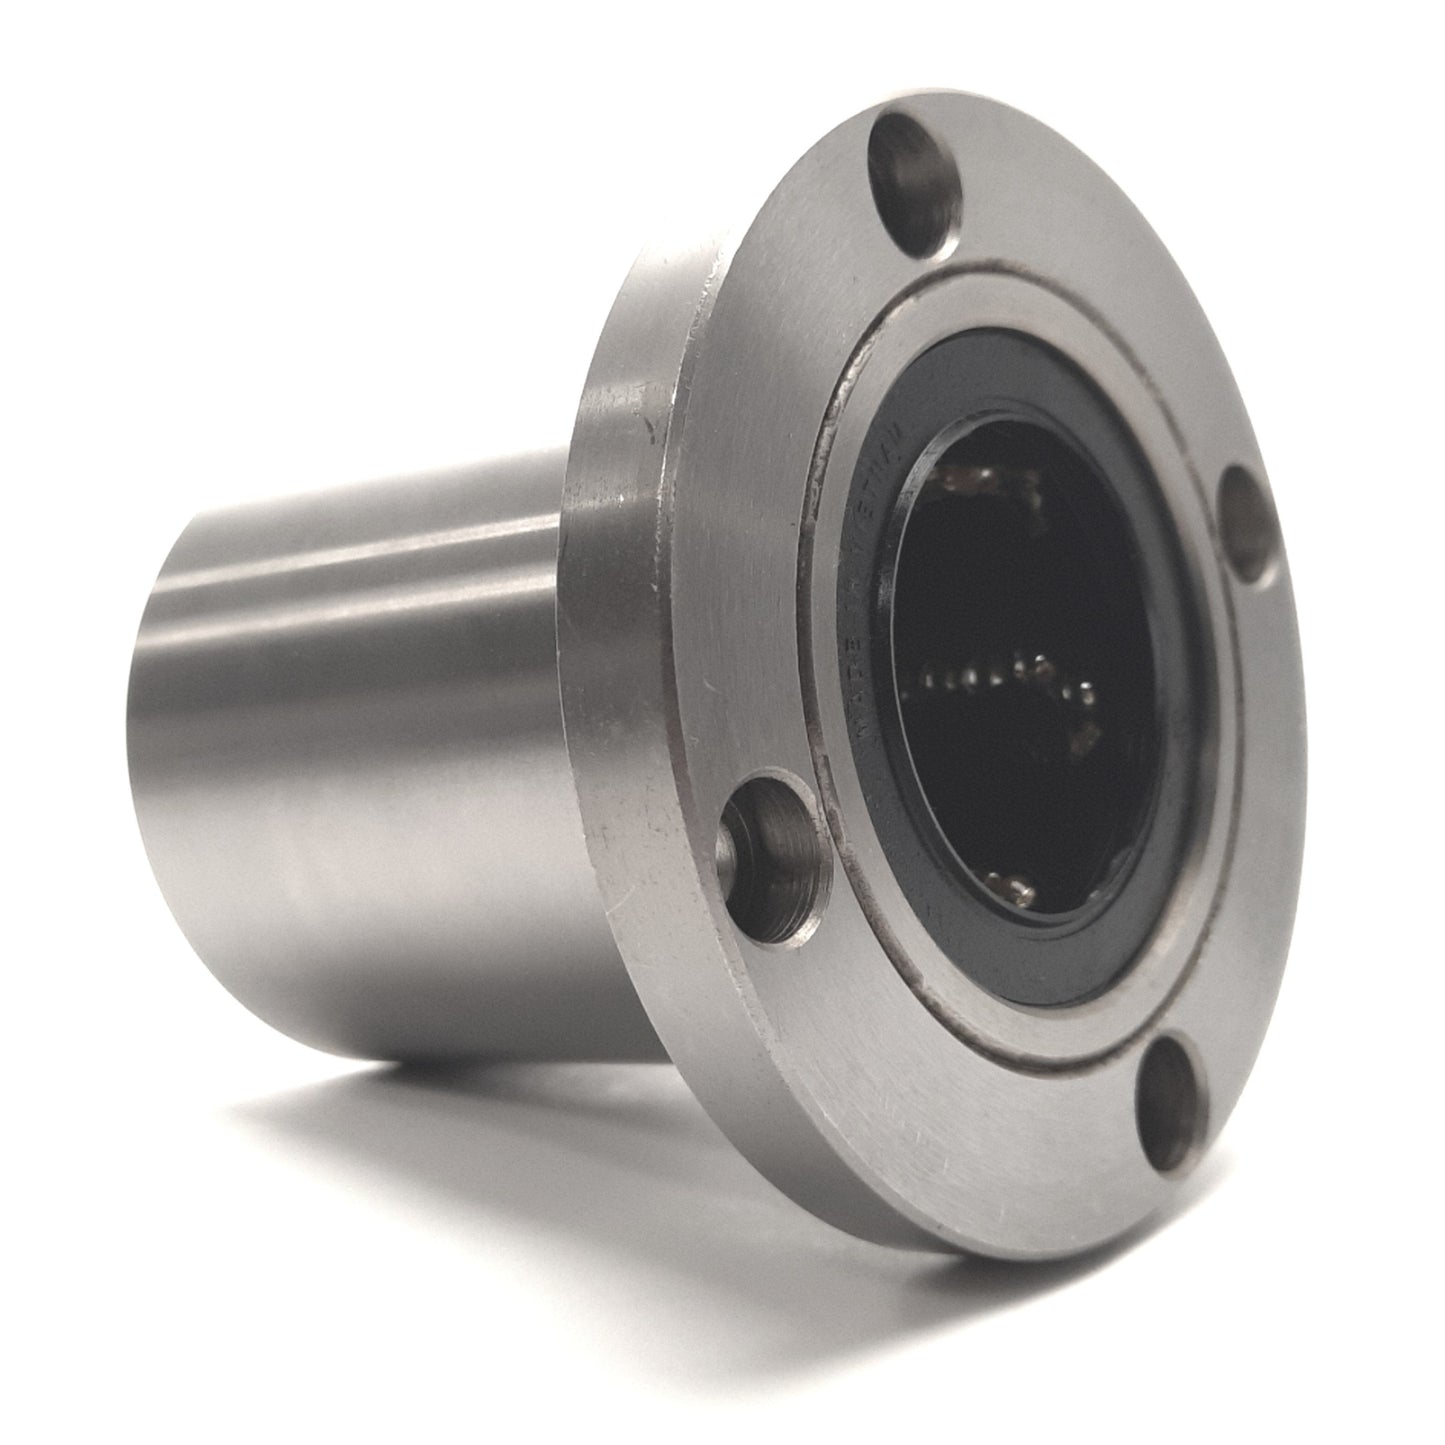 New Other Misumi LHFR50 Linear Bushing Flange Type, For 50mm Shaft, 100mm Length 80mm OD